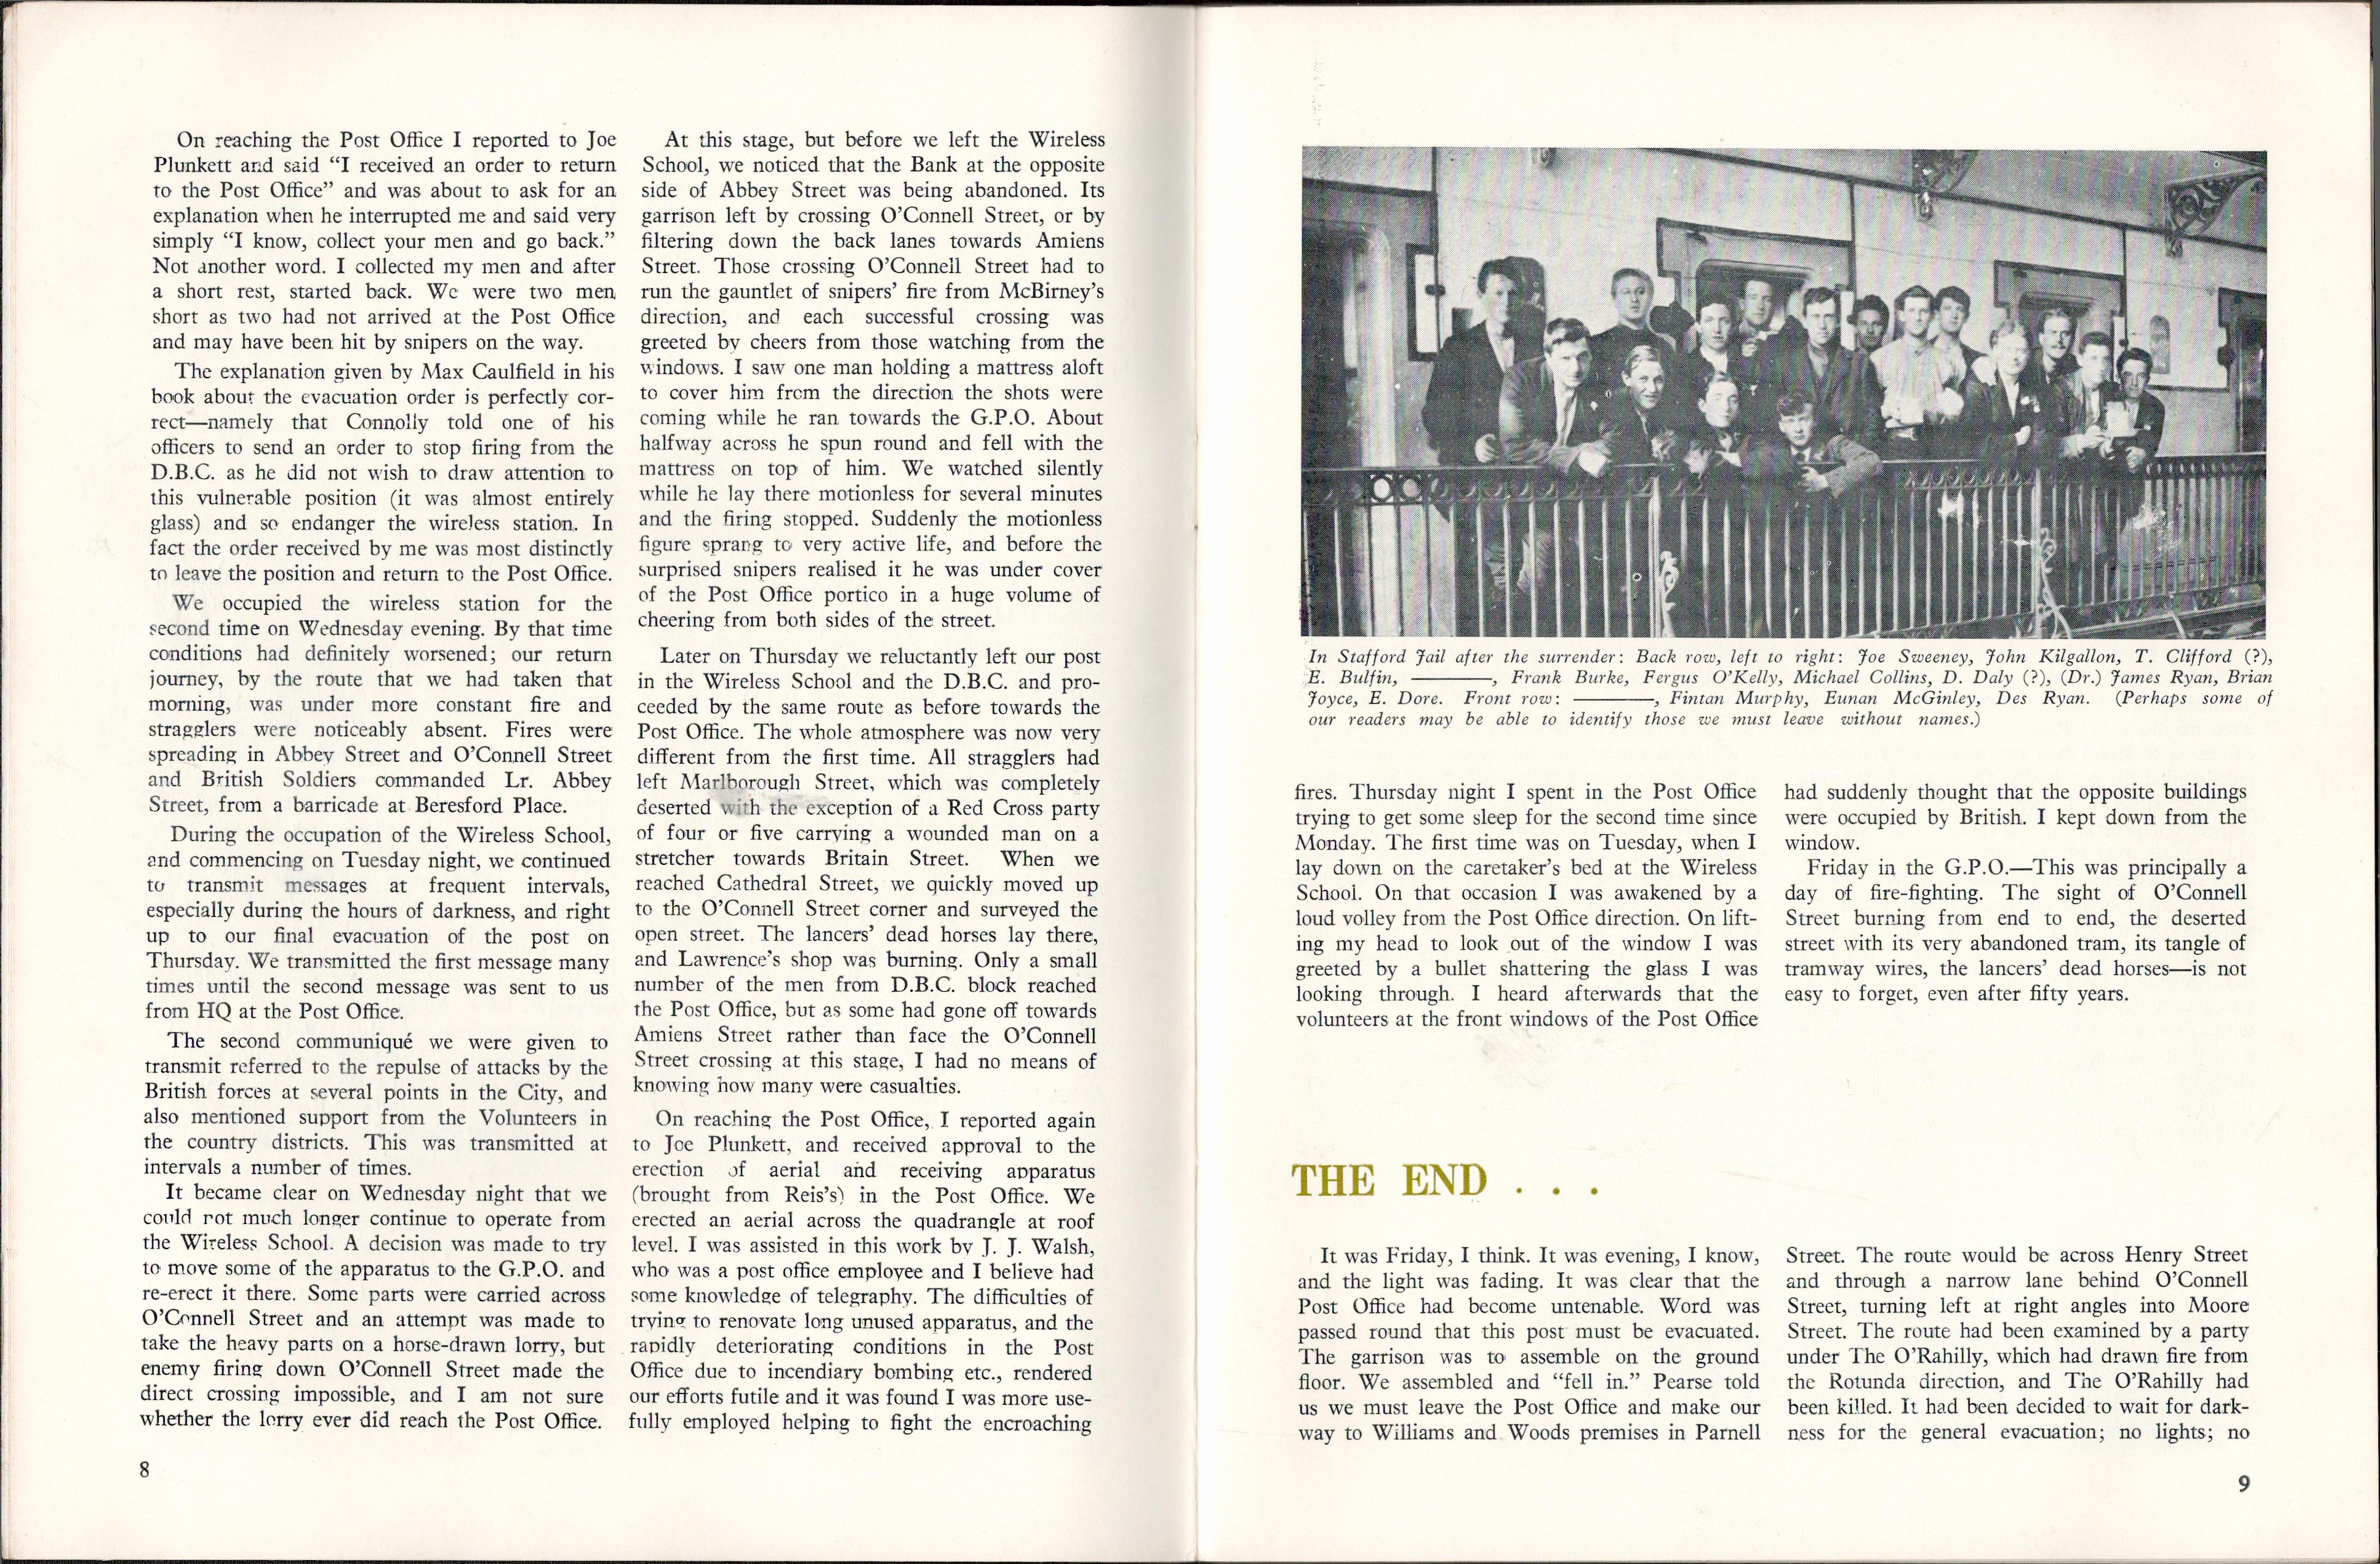 1966 Journal 50th Anniversary The Easter Rising 1916 - Image 7 of 9